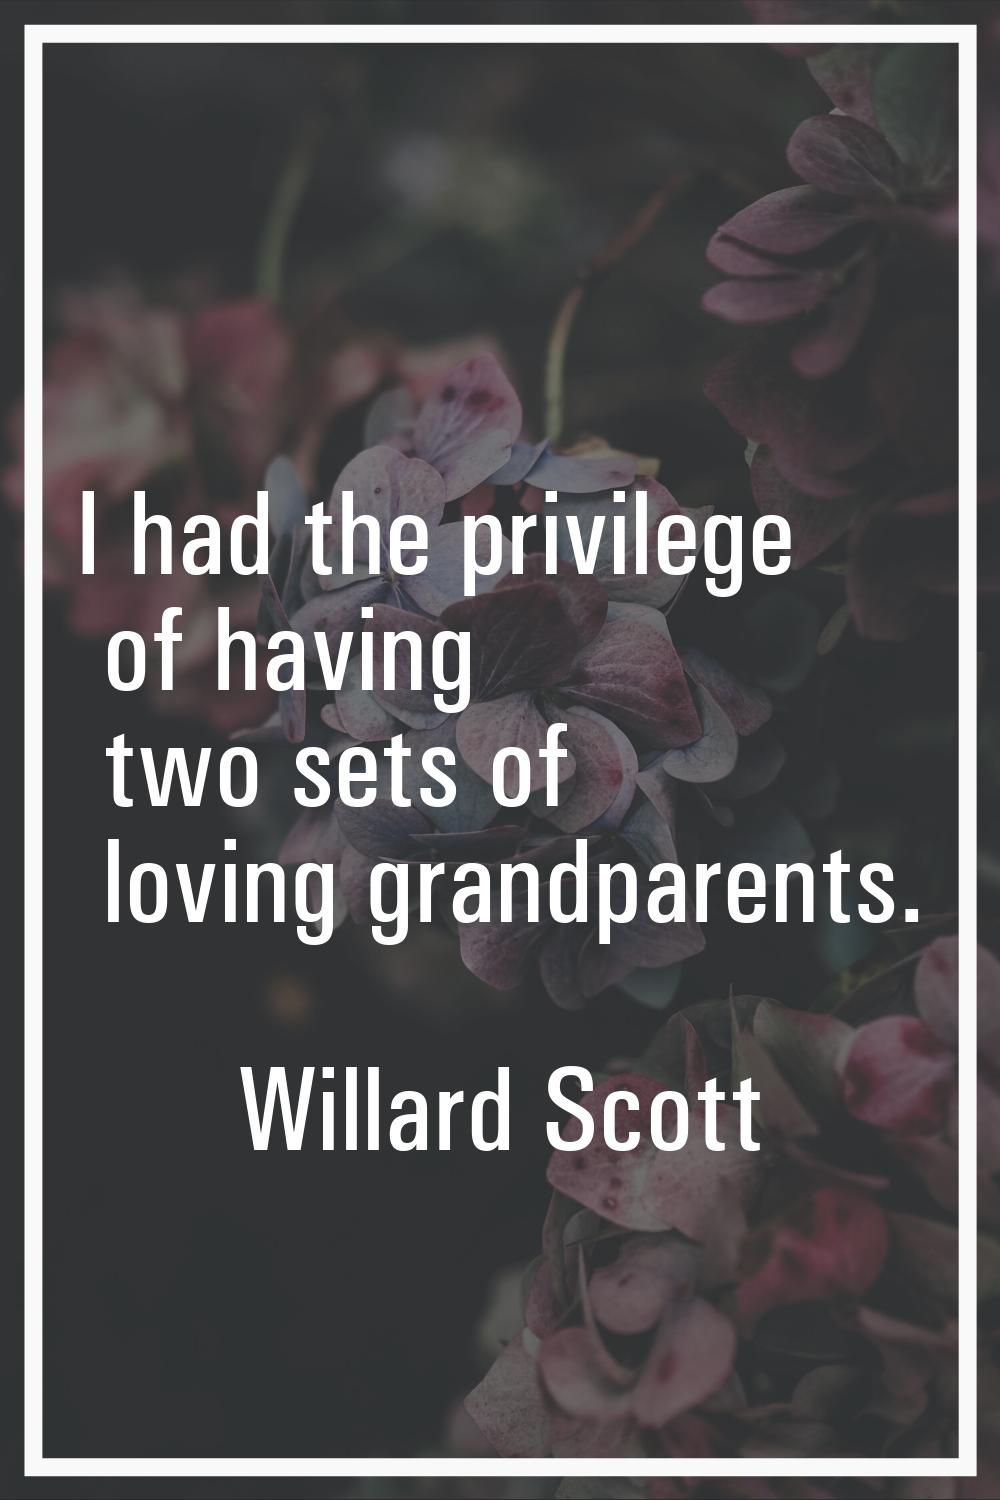 I had the privilege of having two sets of loving grandparents.